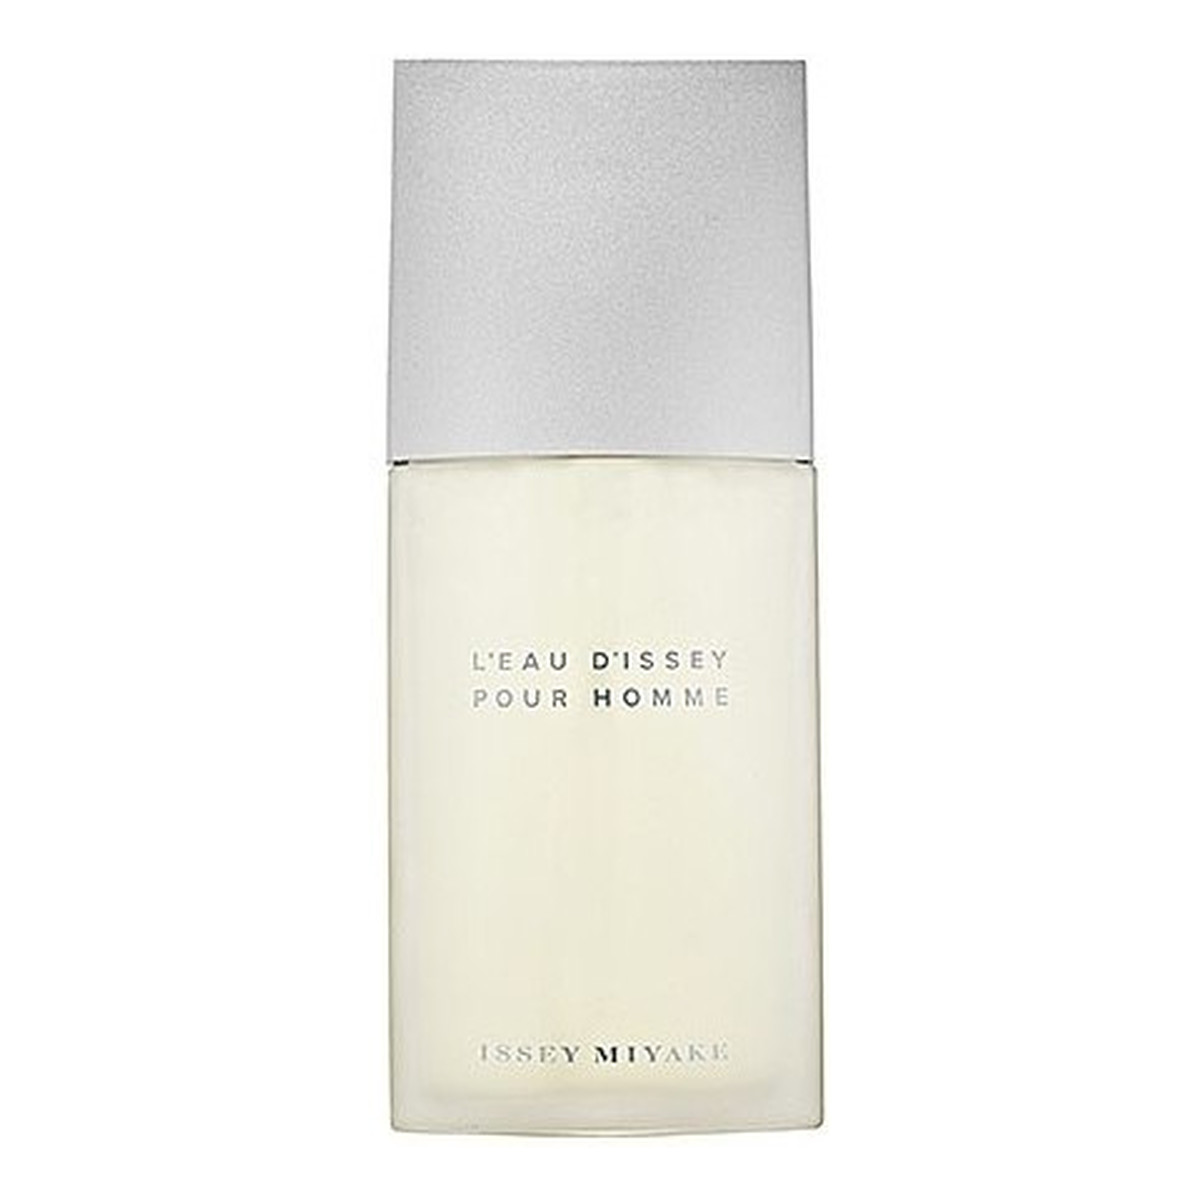 Issey Miyake L'Eau d'Issey Pour Homme woda toaletowa TESTER 125ml